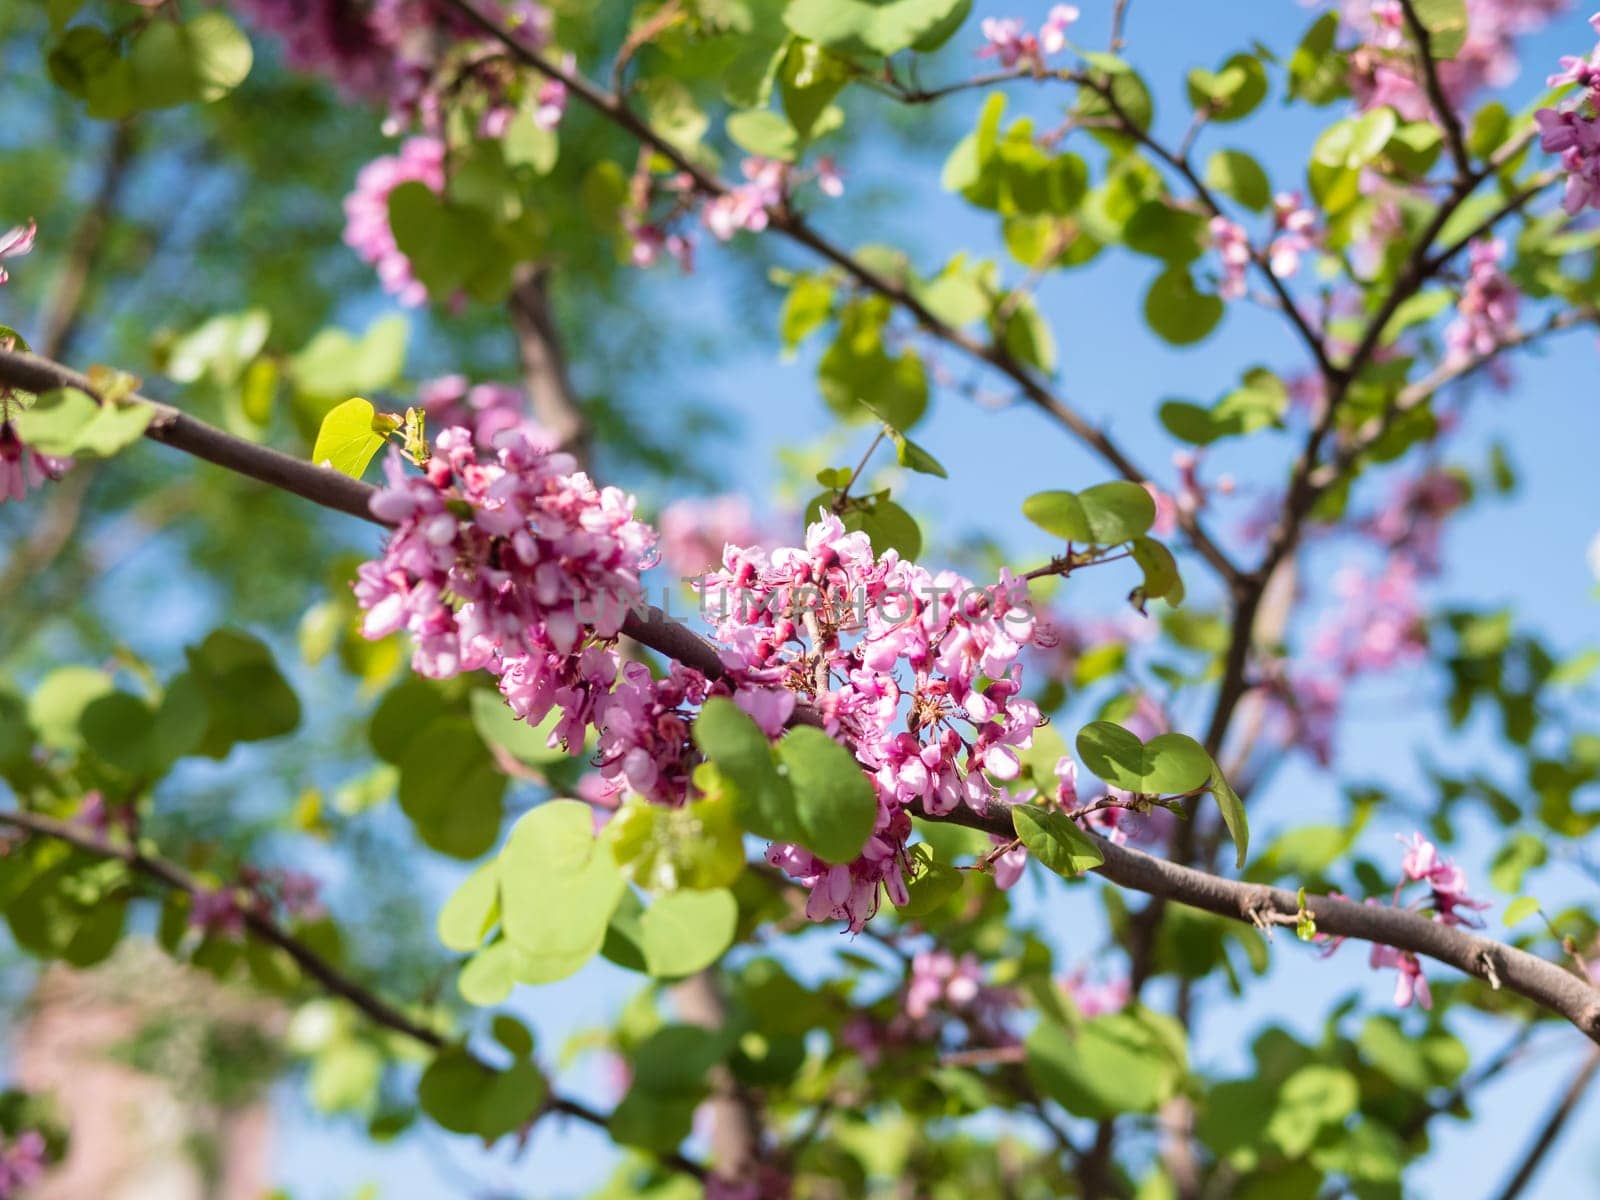 A blossoming prunus branch with pink flowers and green leaves under the sky by jackreznor